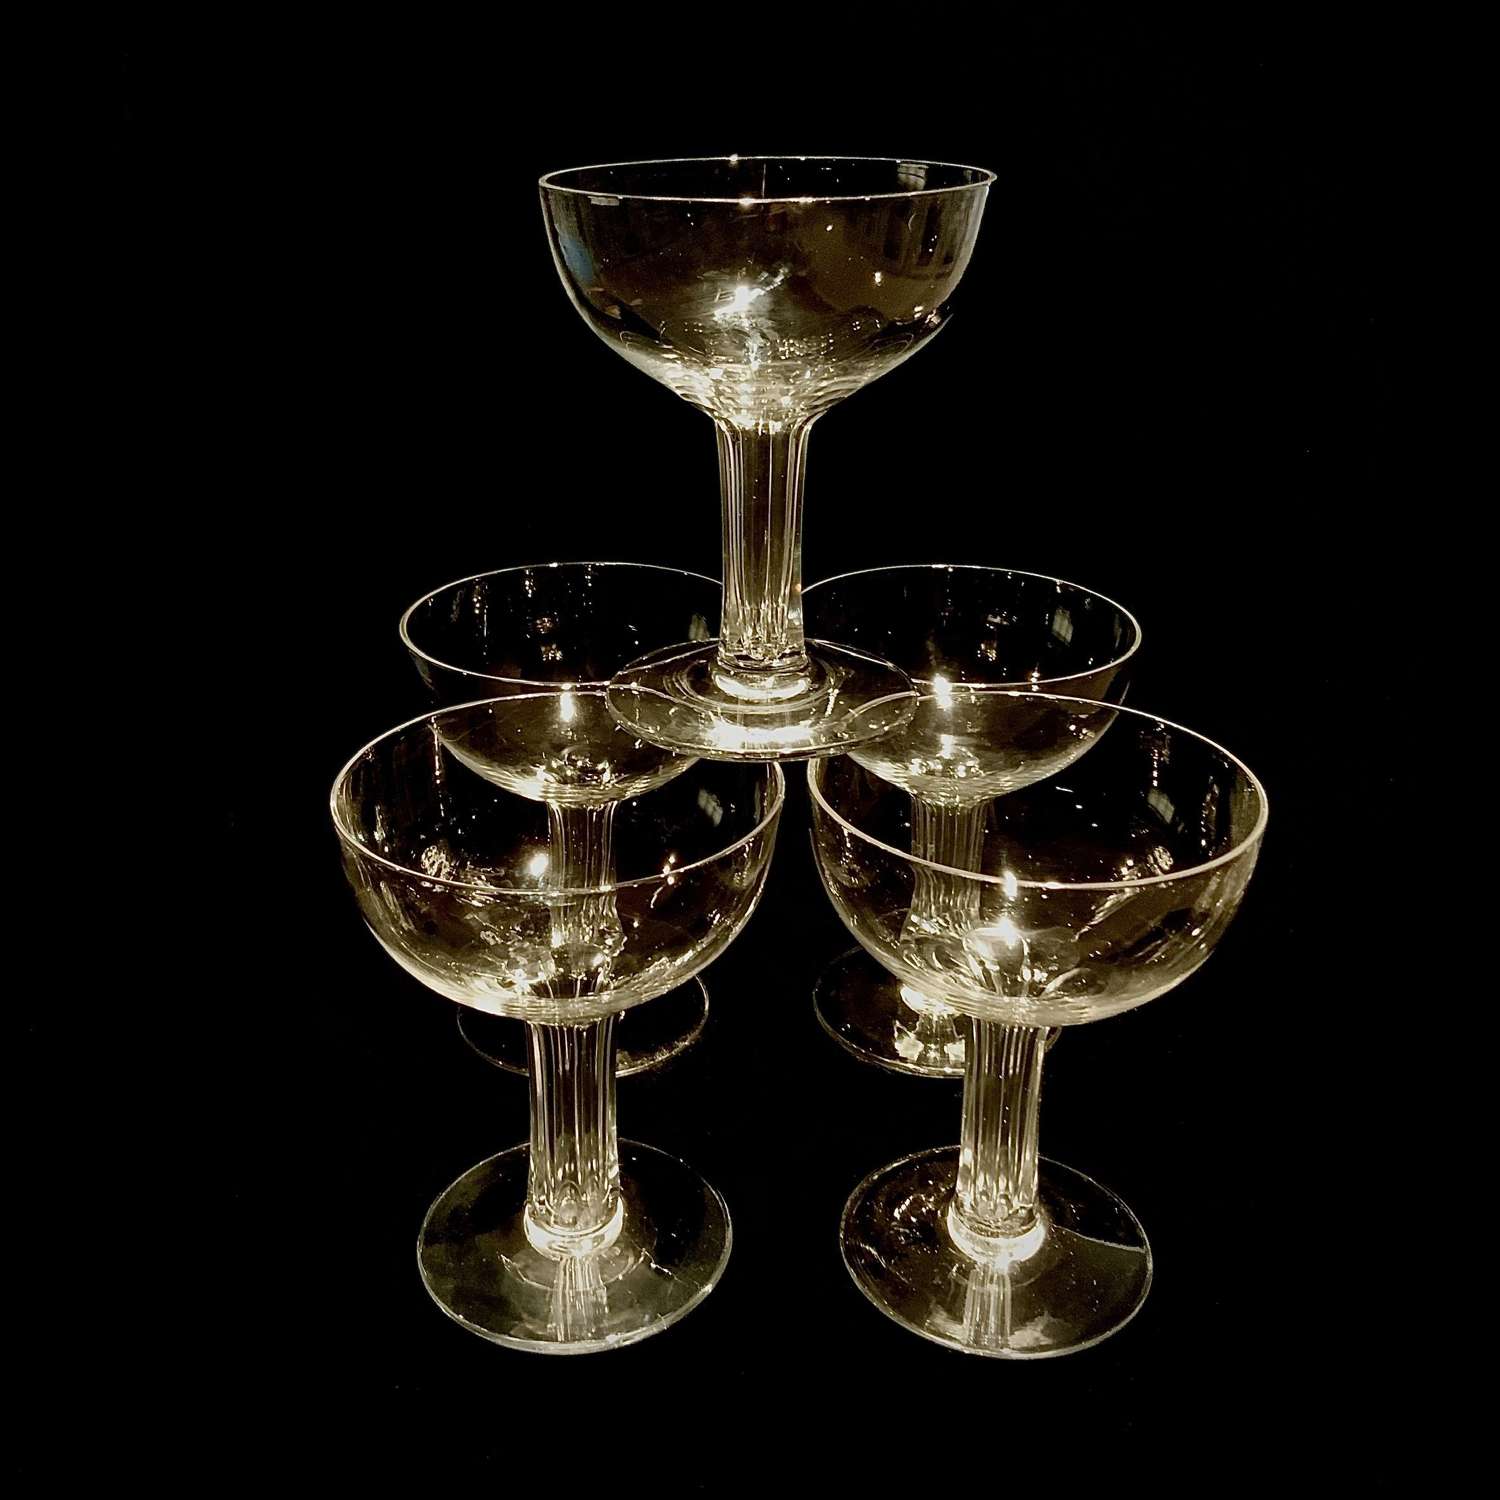 A Set of Five (5) Hollow Stem Crystal Champagne Coupes or Boats